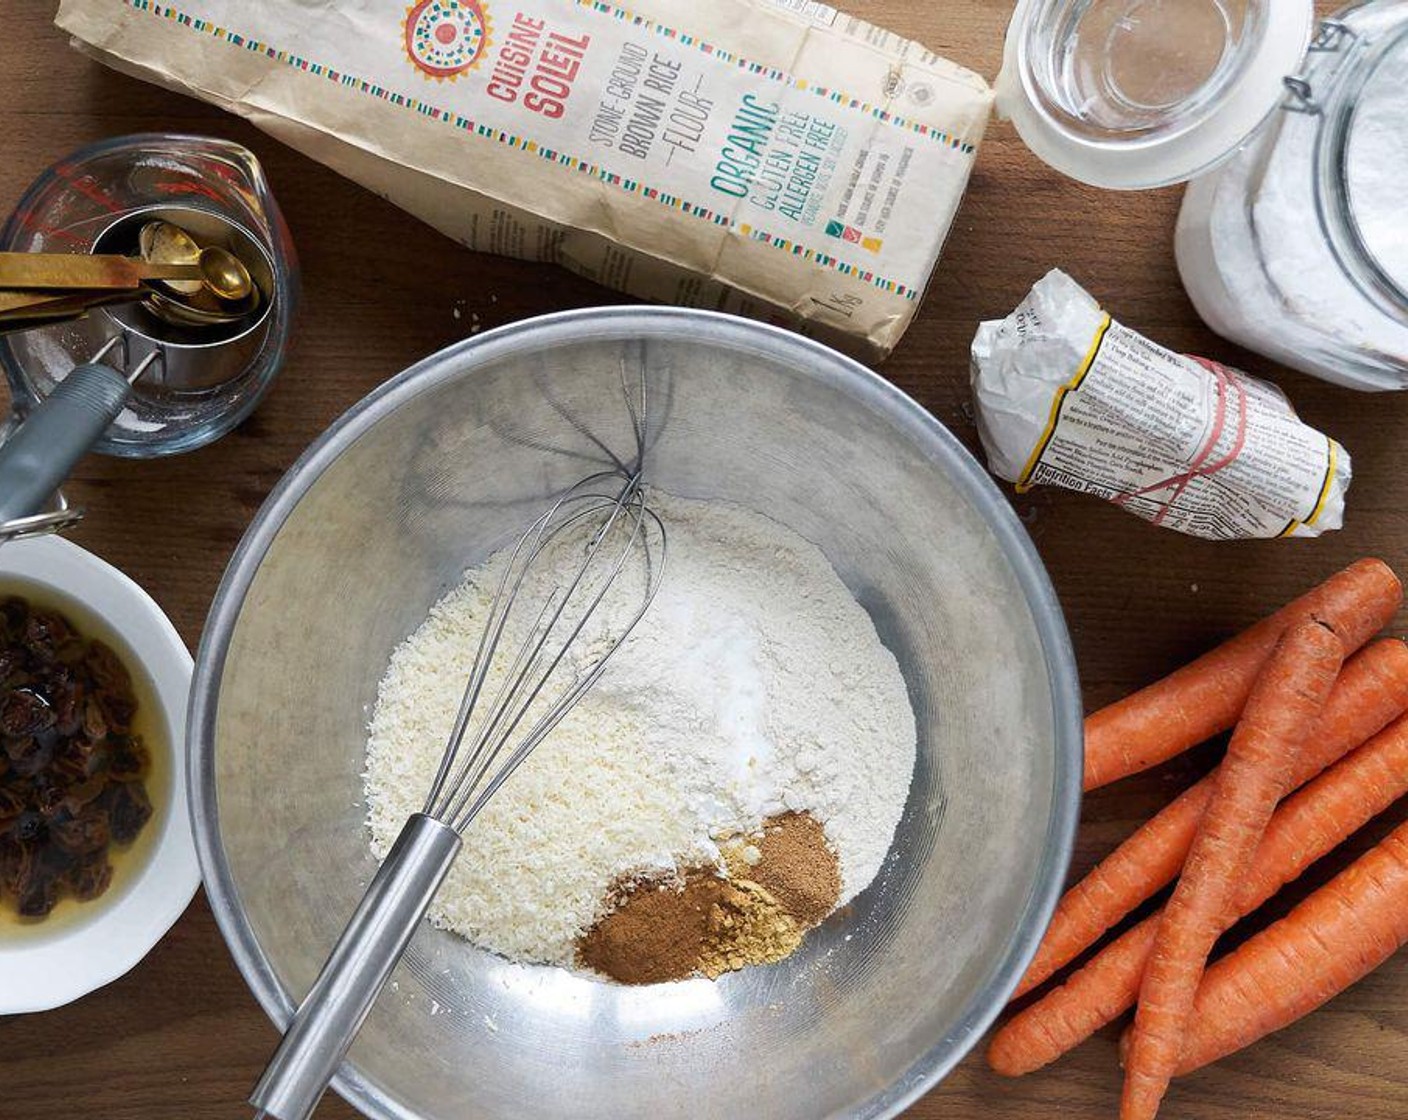 step 4 In a large bowl, combine Brown Rice Flour (1 cup), Unsweetened Shredded Coconut (1/2 cup), Baking Powder (1 tsp), Ground Cinnamon (1 tsp), Baking Soda (1/2 tsp), Ground Ginger (1/2 tsp), and Ground Nutmeg (1/2 tsp).